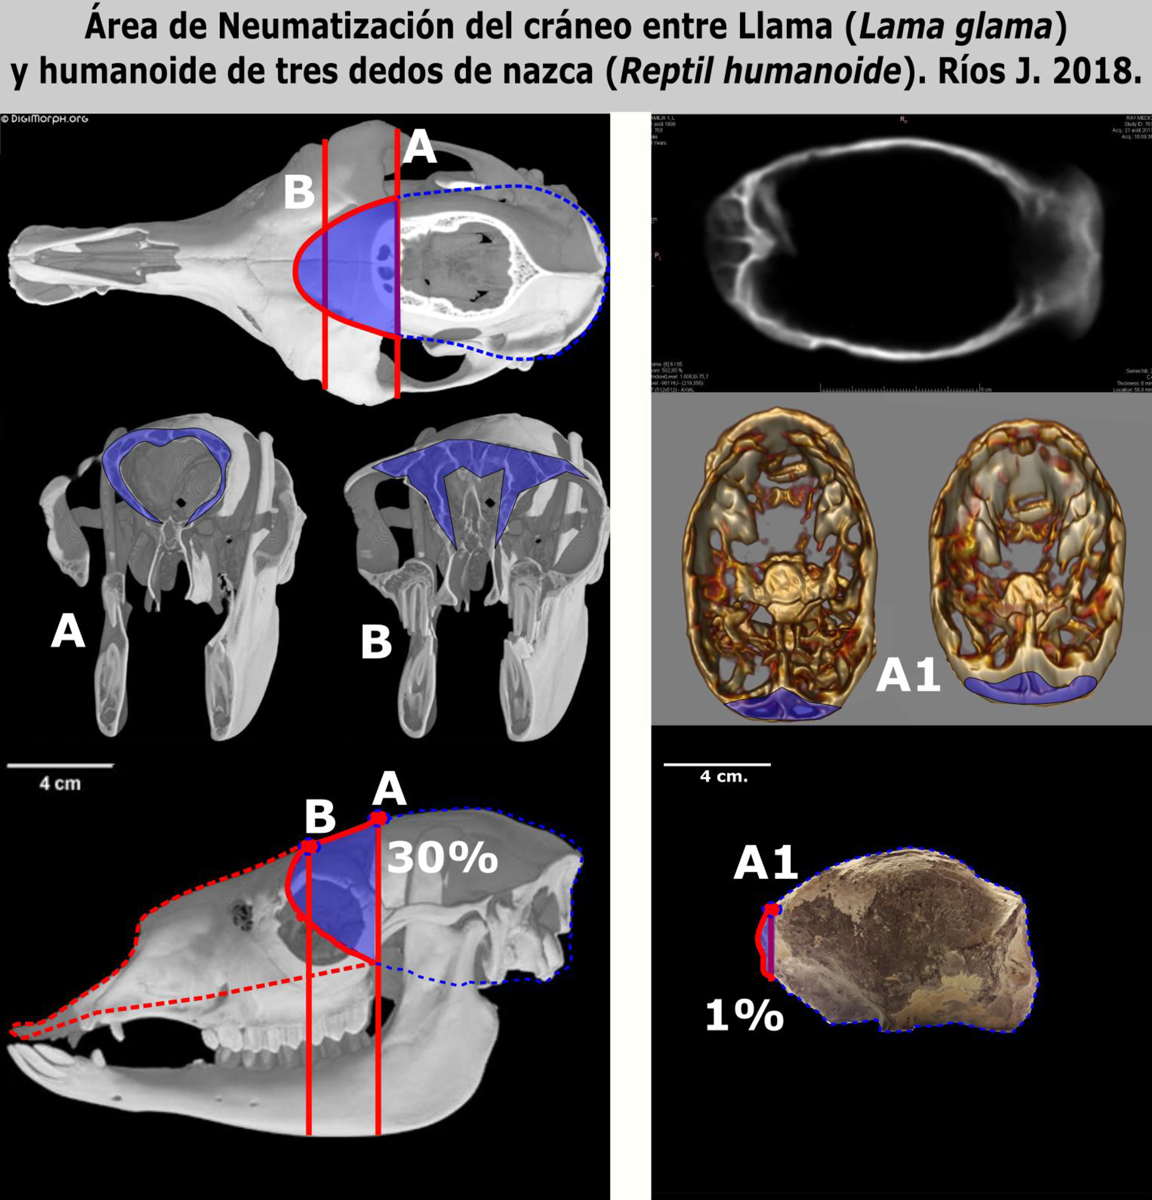 Comparison of tomographic sections of skulls (scanner images) between the Lama (Lama glama) and the three-fingered Nasca humanoid (Humanoid Reptile). Rios J. 2018